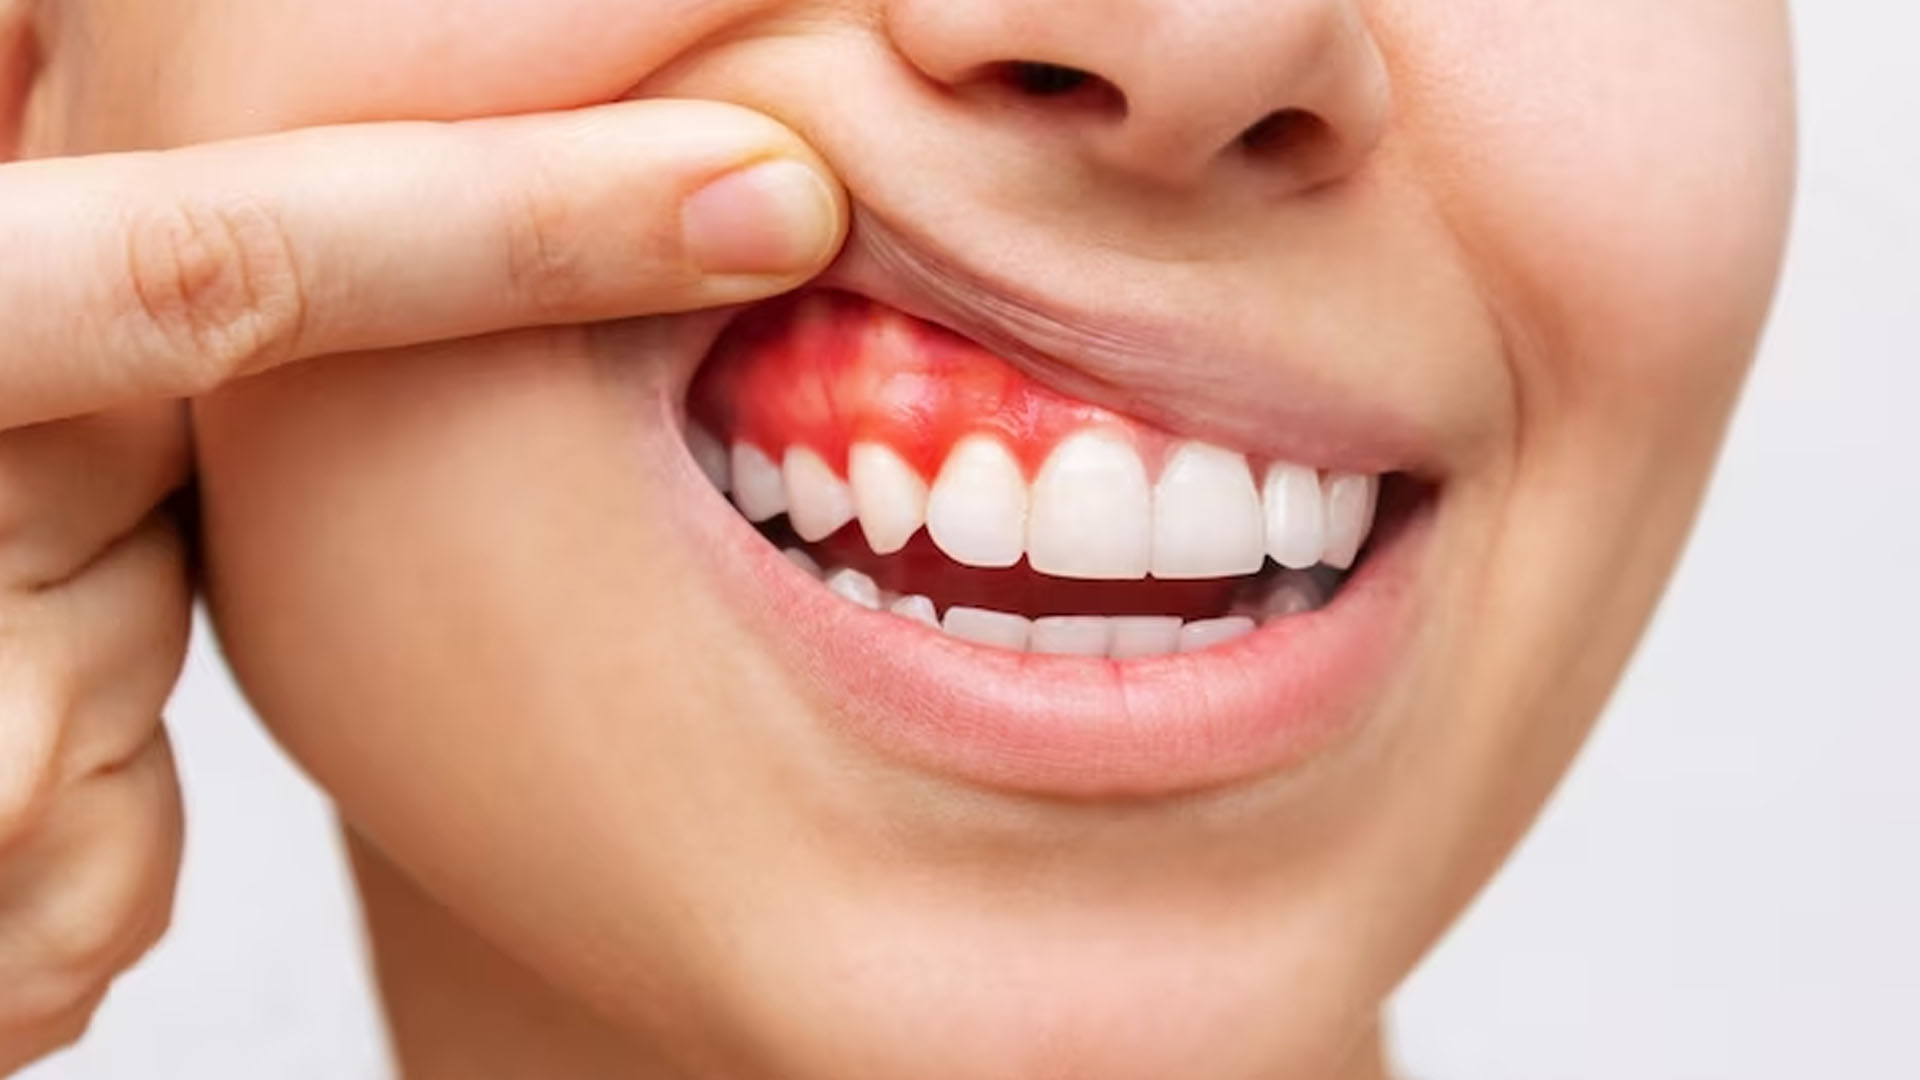 What are the Home Remedies for Bleeding Gums?